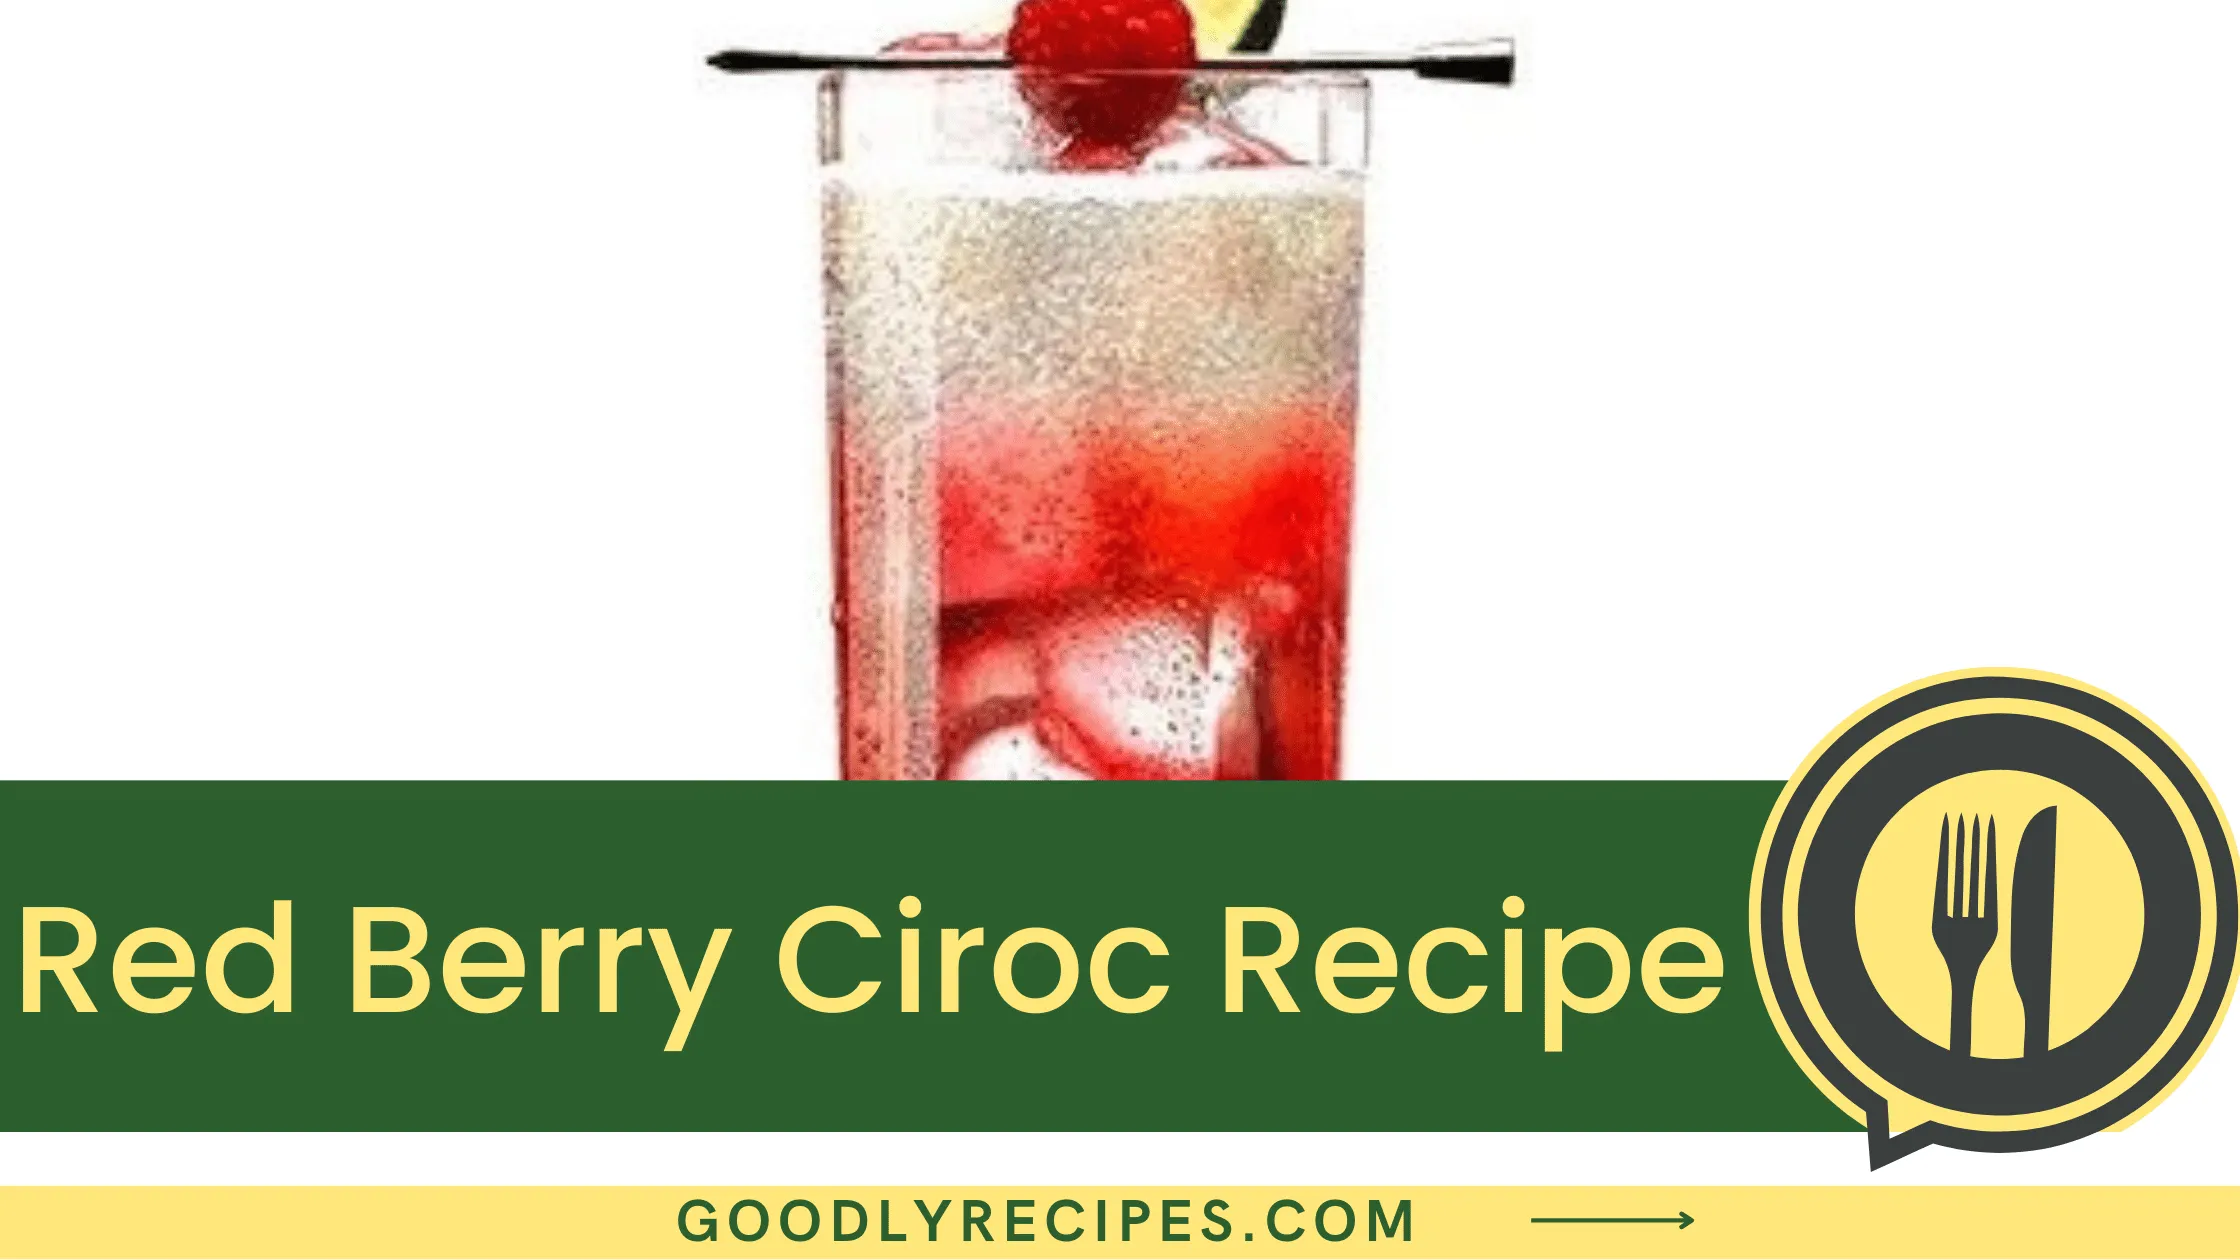 Red Berry Ciroc Recipe - For Food Lovers